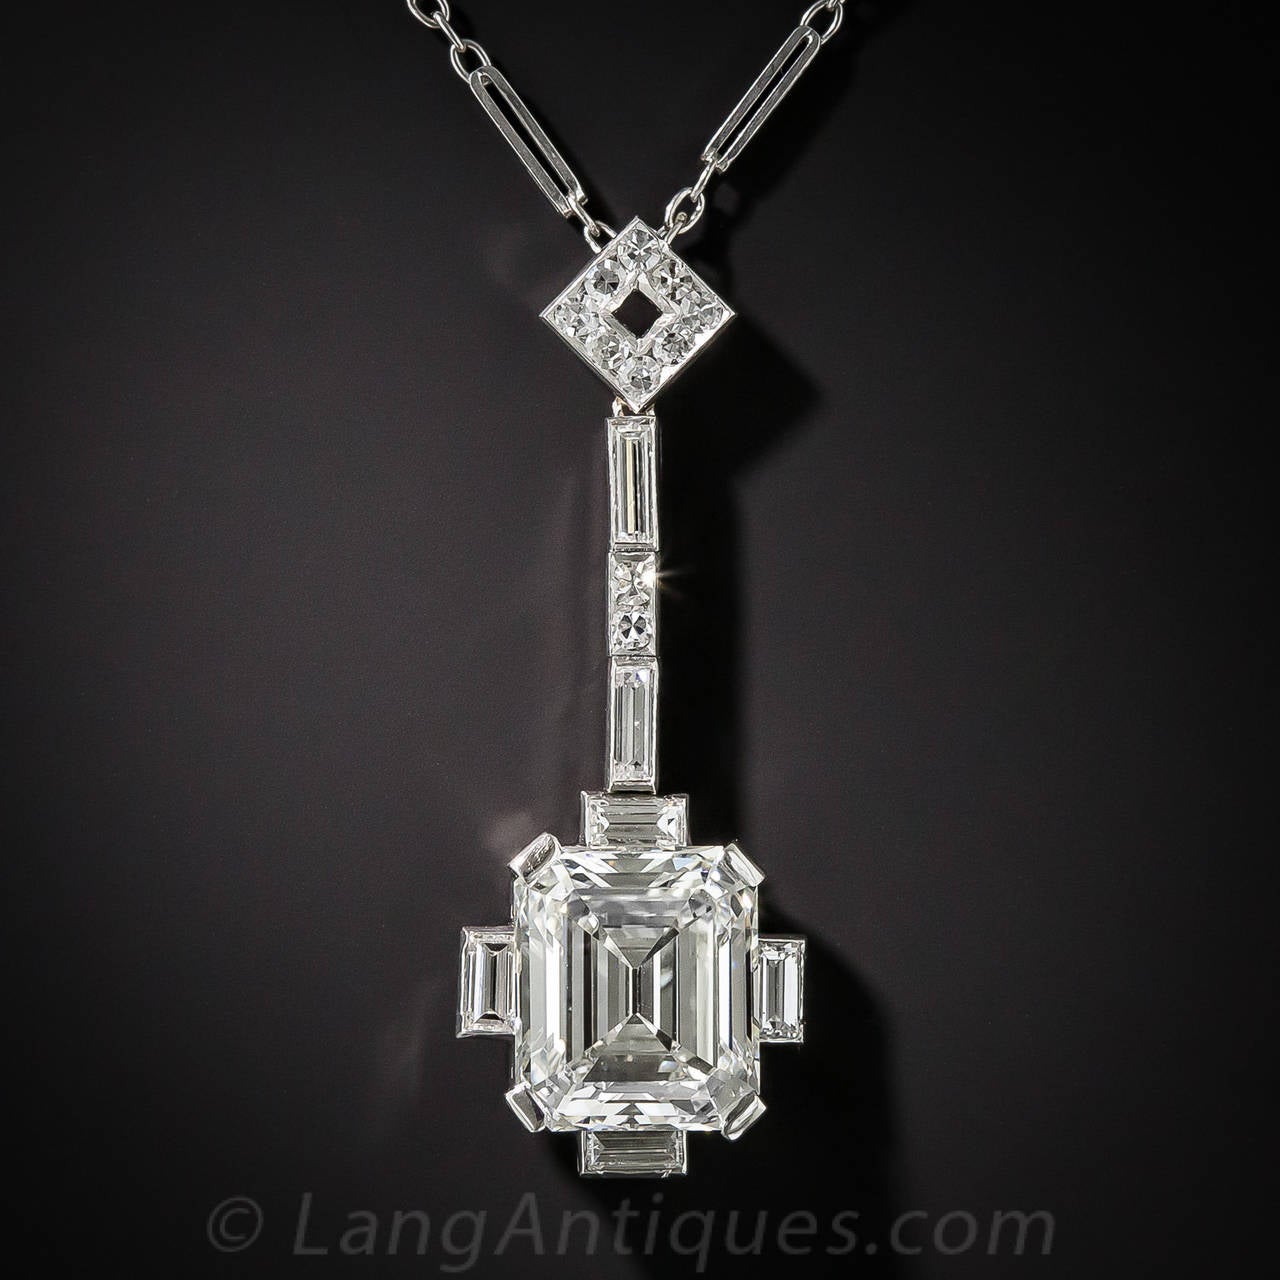 Rare, radiant and ravishing. A classically fashioned, vintage emerald-cut diamond (a.k.a. Asscher-cut), weighing 3.47 carats (accompanied by a GIA Diamond Grading Report stating: J color - VS1 clarity) is elegantly presented in timeless Art Deco